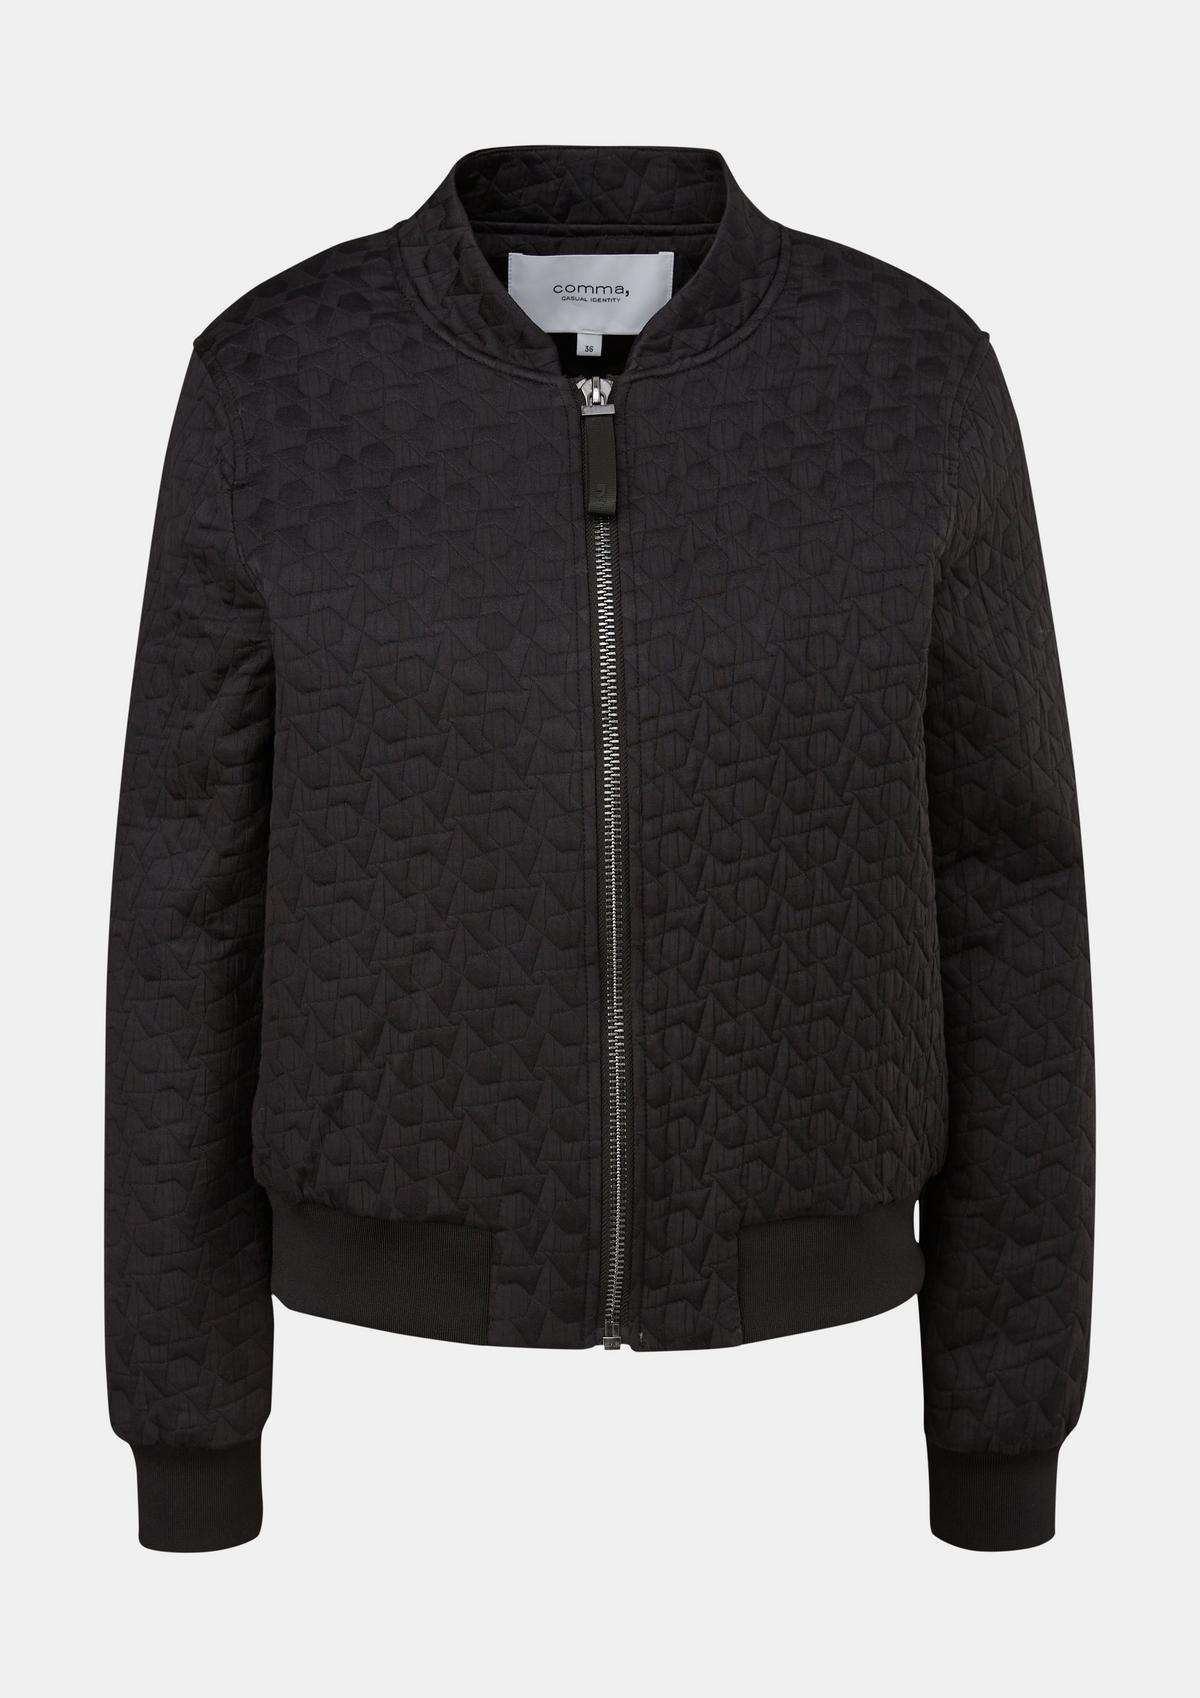 comma Bomber jacket with a patterned texture